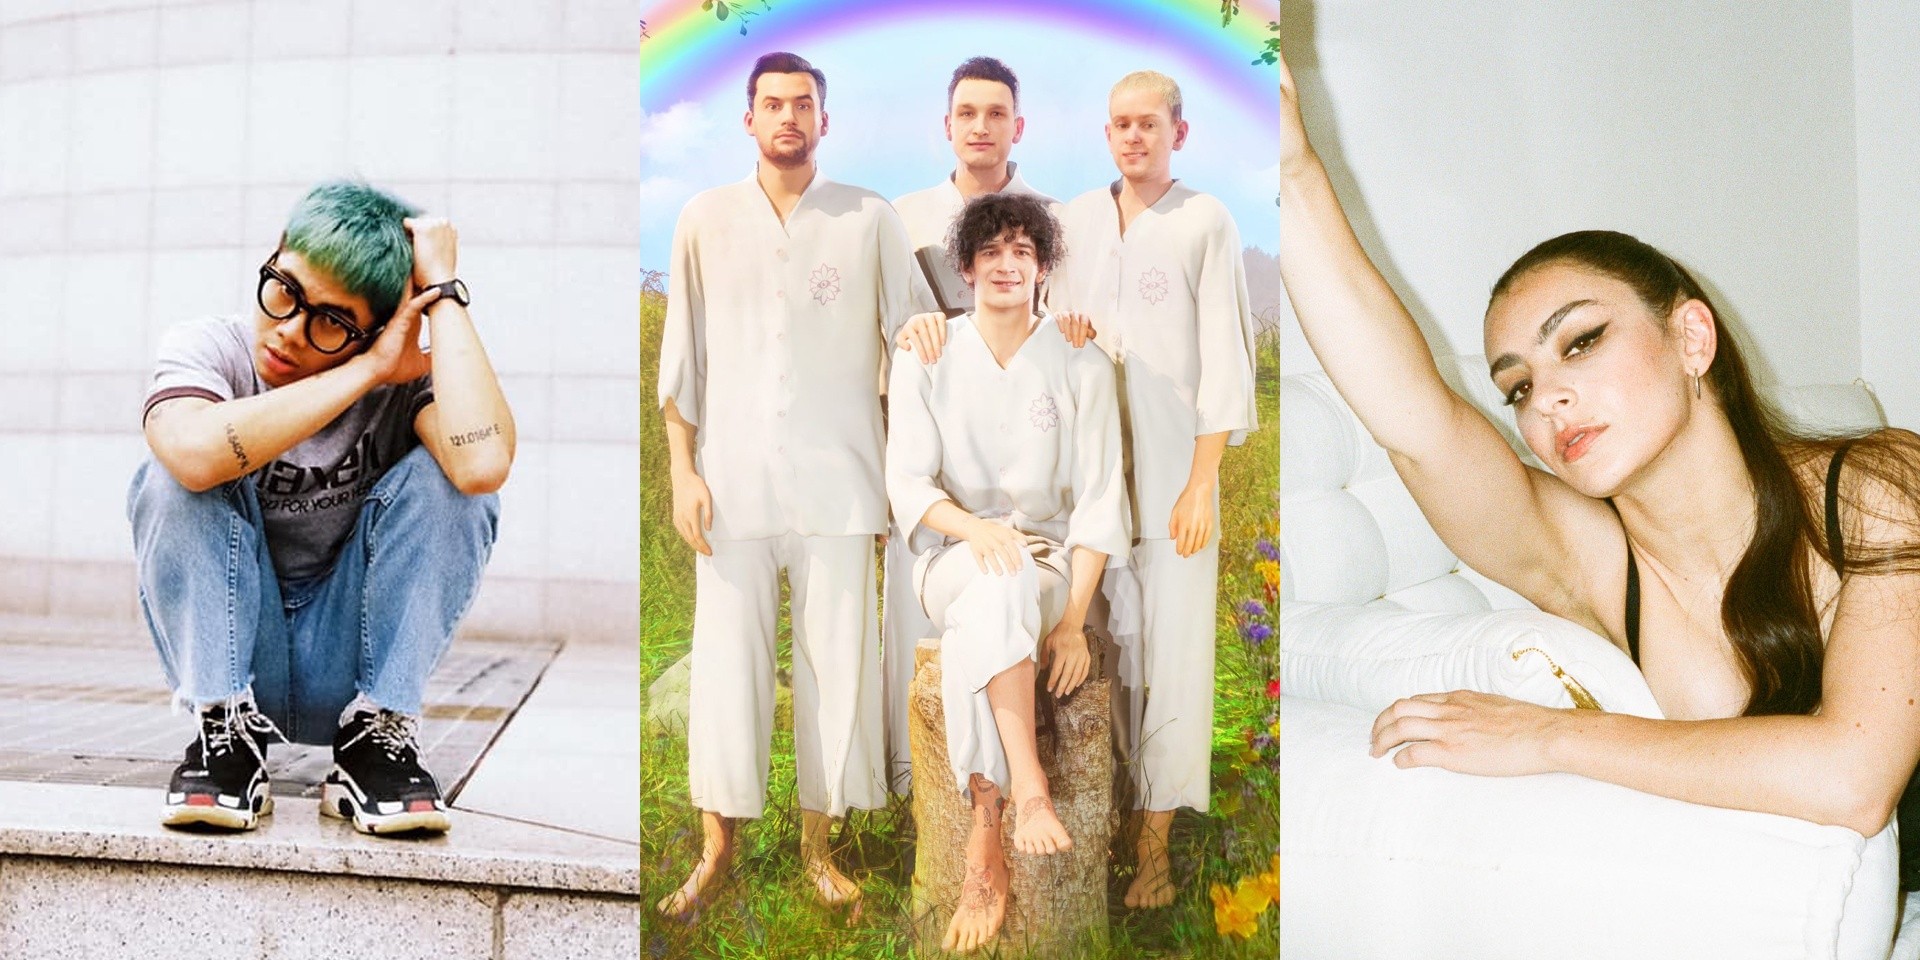 No Rome, Charli XCX, and The 1975 make "supergroup" debut with 'Spinning' – listen